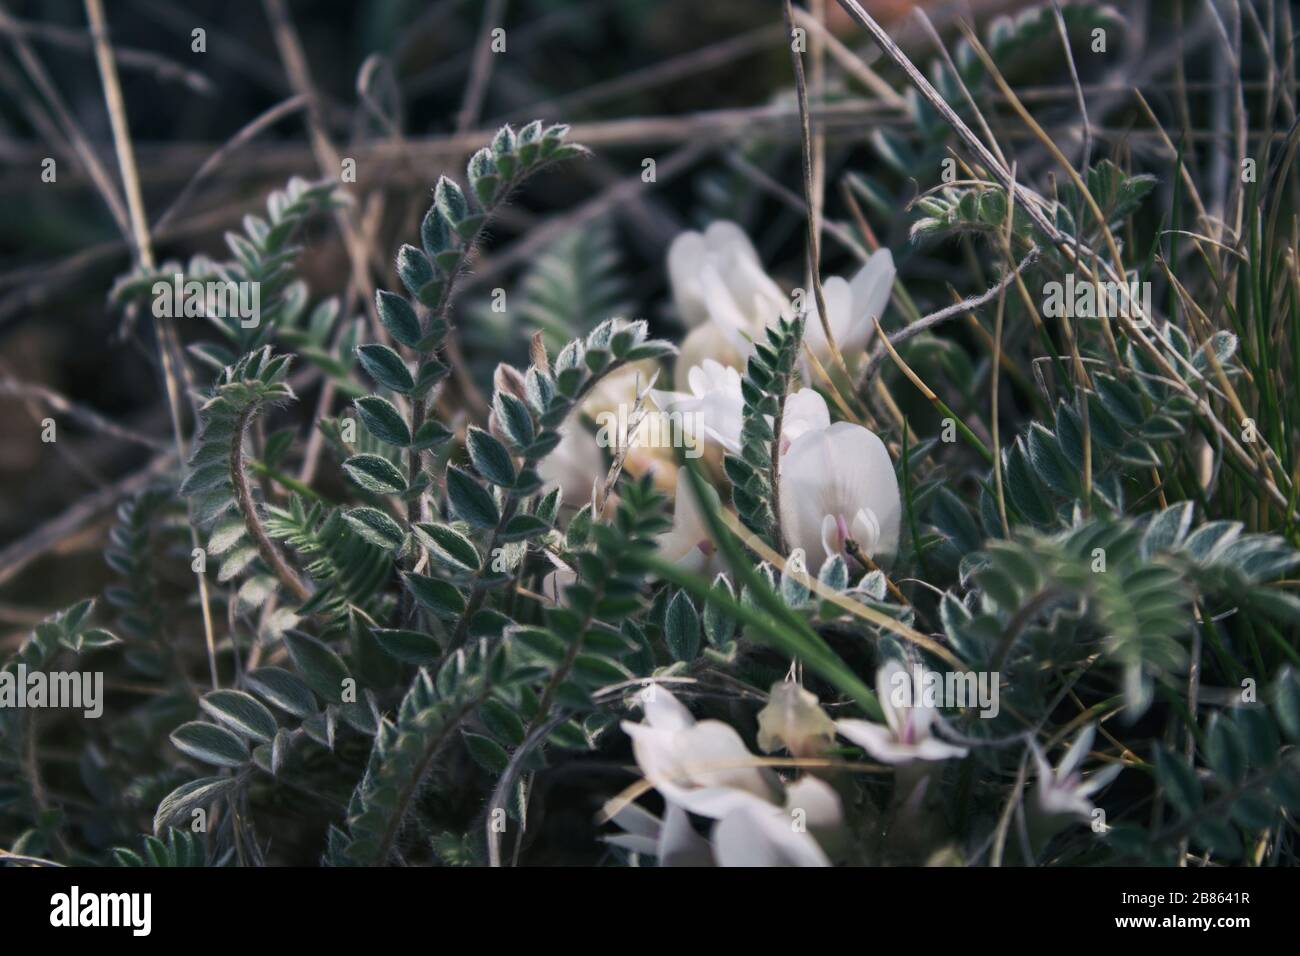 Astragalus. Astragalus exscapus. Blossoming Astragalus. Meadow plants. Spring plant. Selective focus. Copy space. Stock Photo